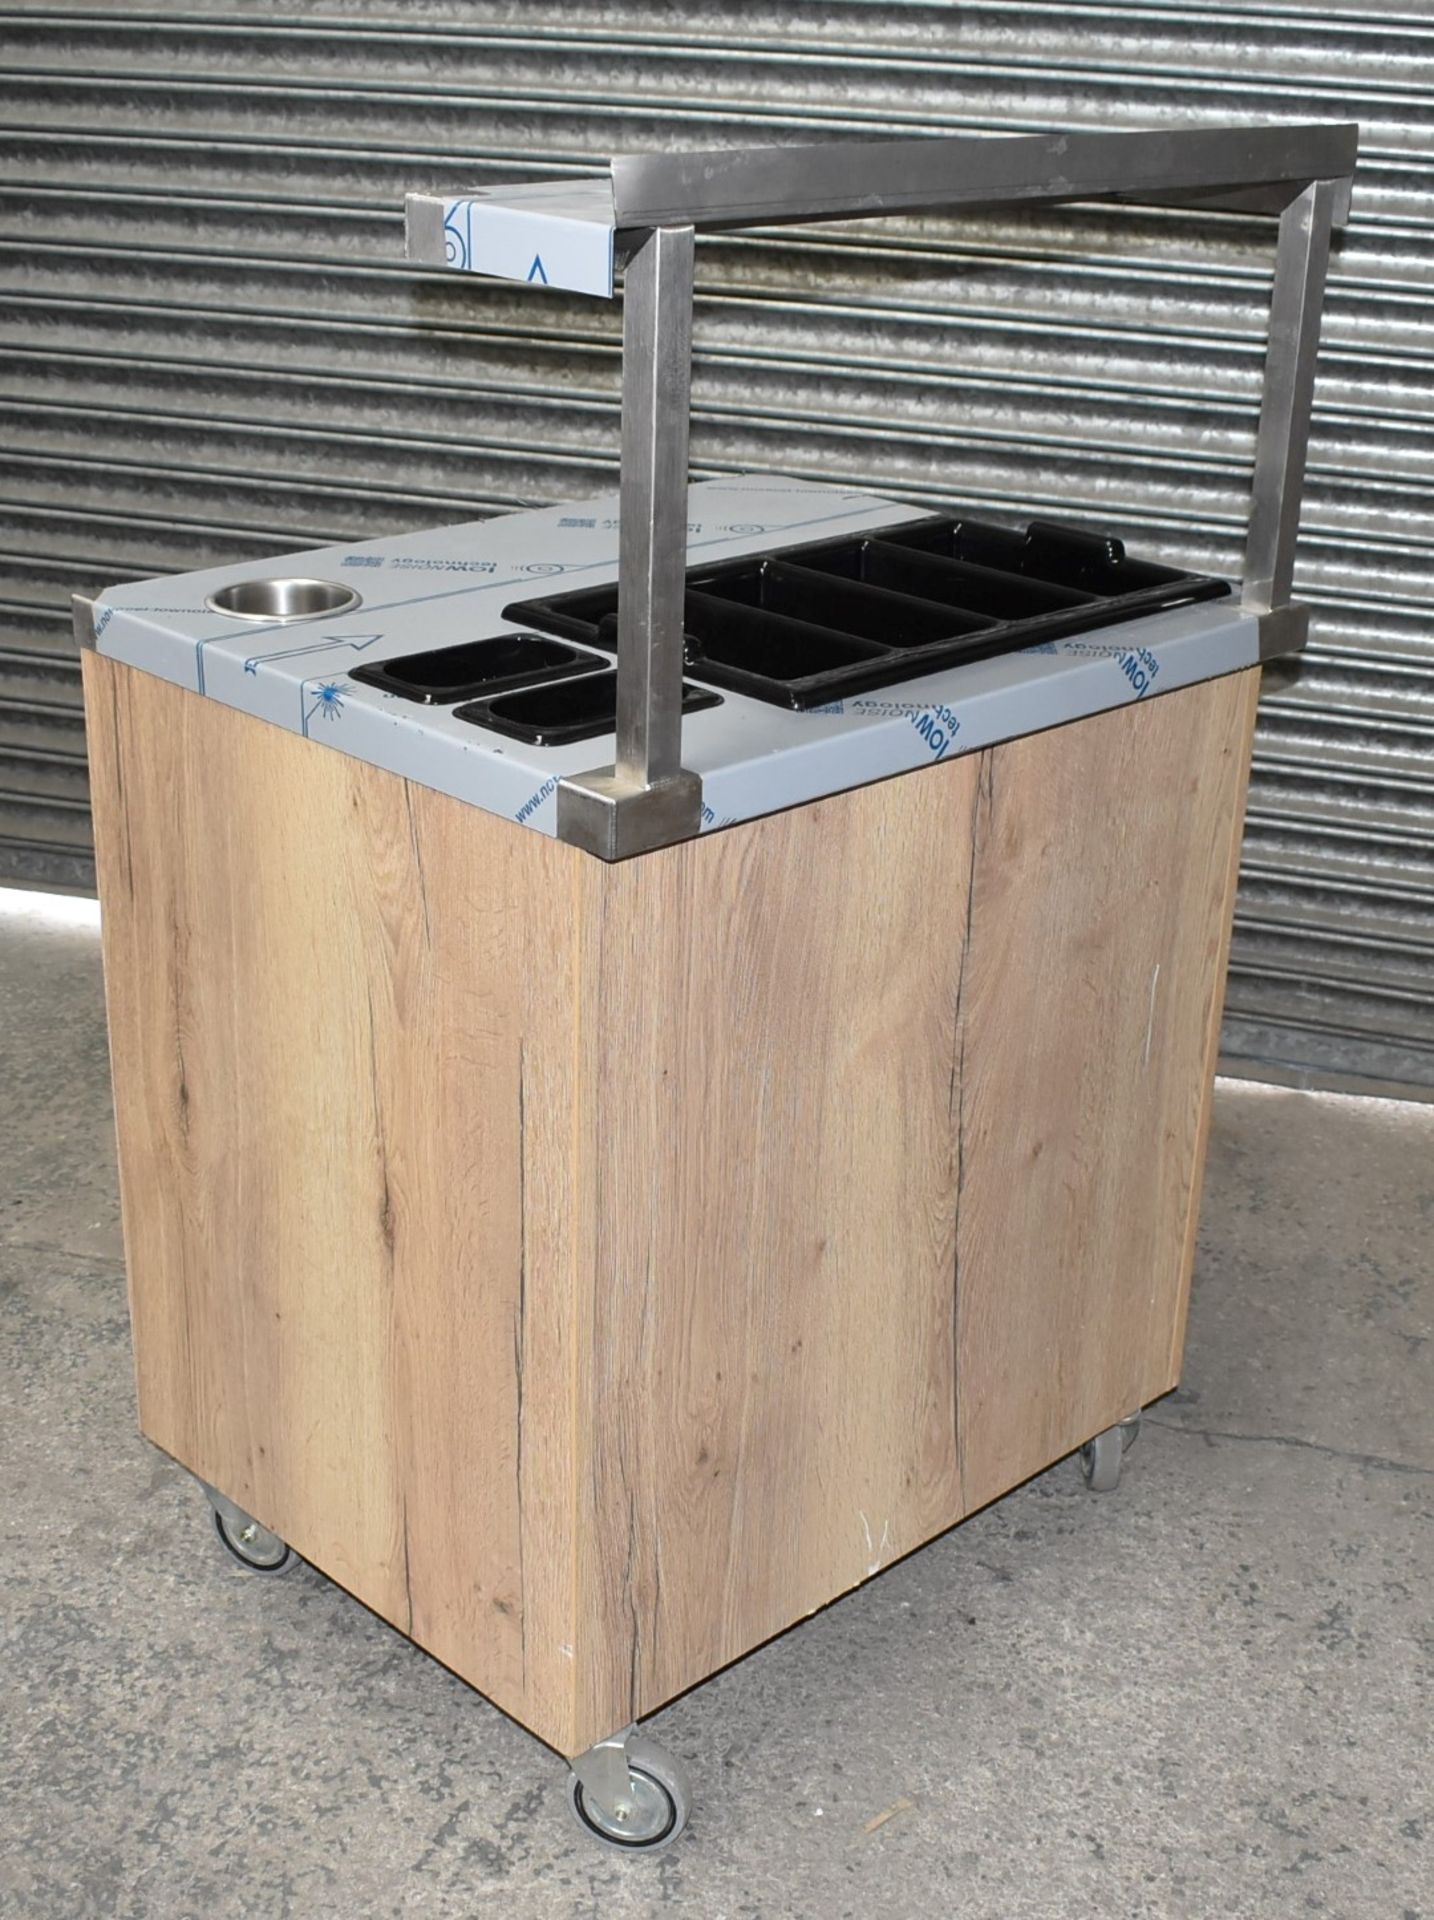 1 x Cutlery Service Trolley Featuring an Oak Cabinet With Internal Drawers, Stainless Steel - Image 13 of 13